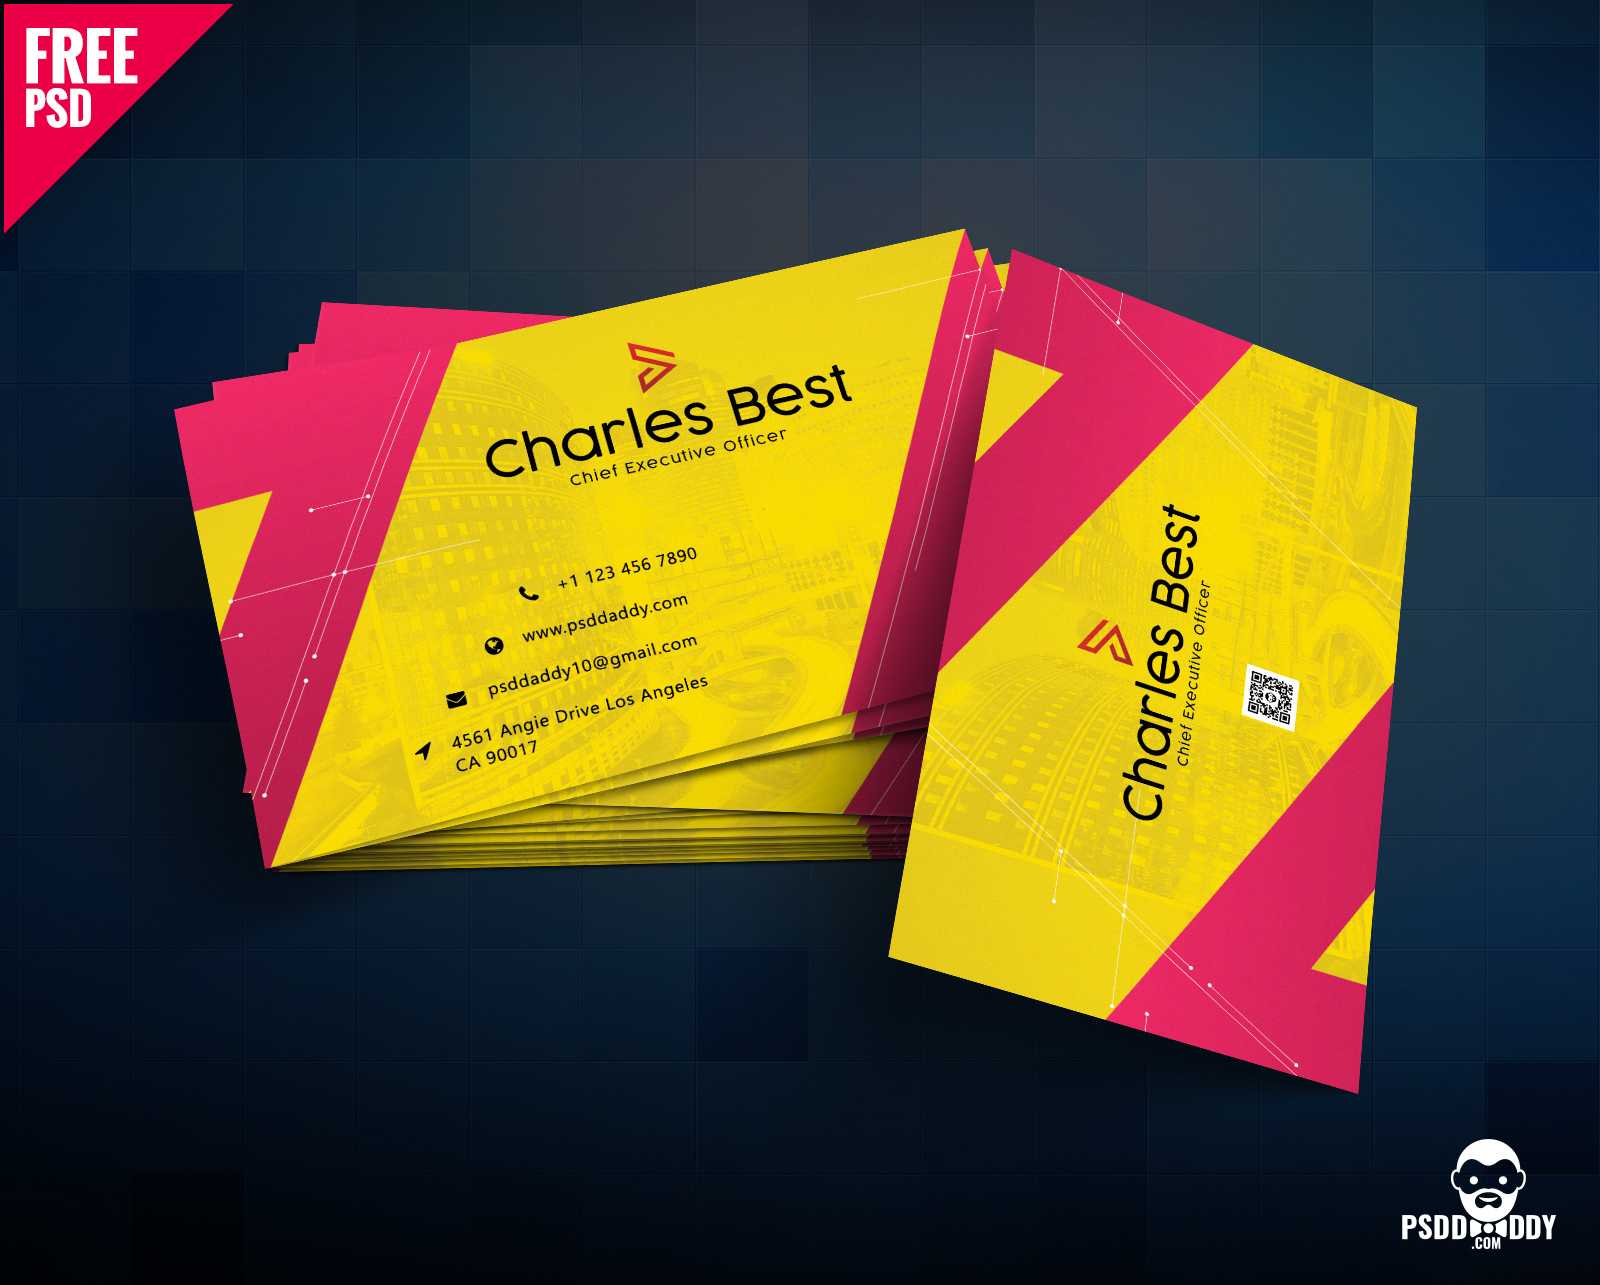 Download] Creative Business Card Free Psd | Psddaddy Inside Visiting Card Templates For Photoshop